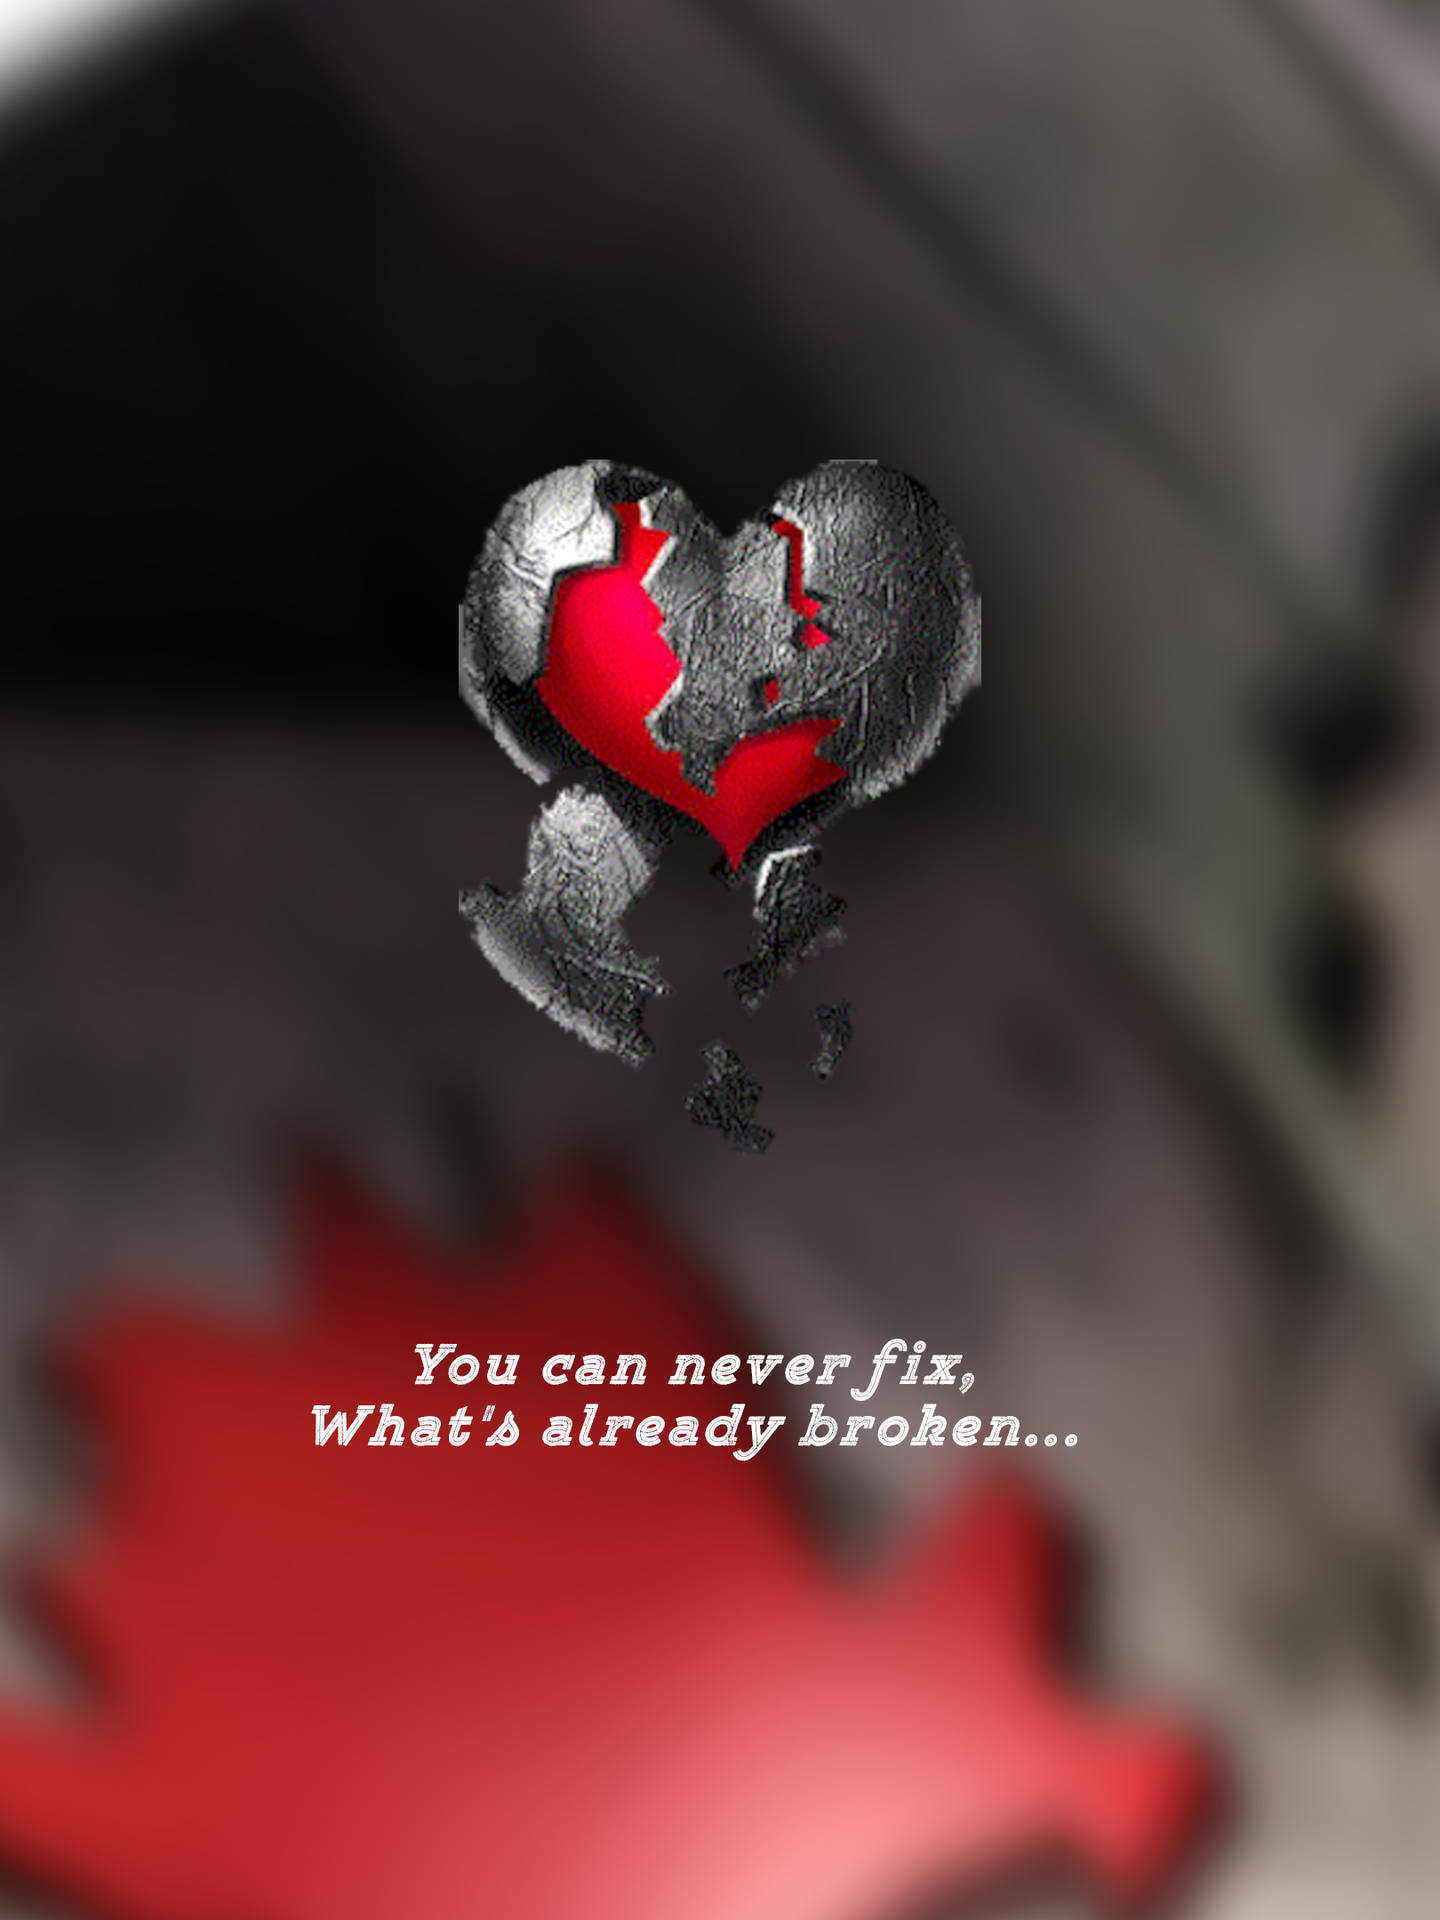 No Love Cracked Metal Heart Background